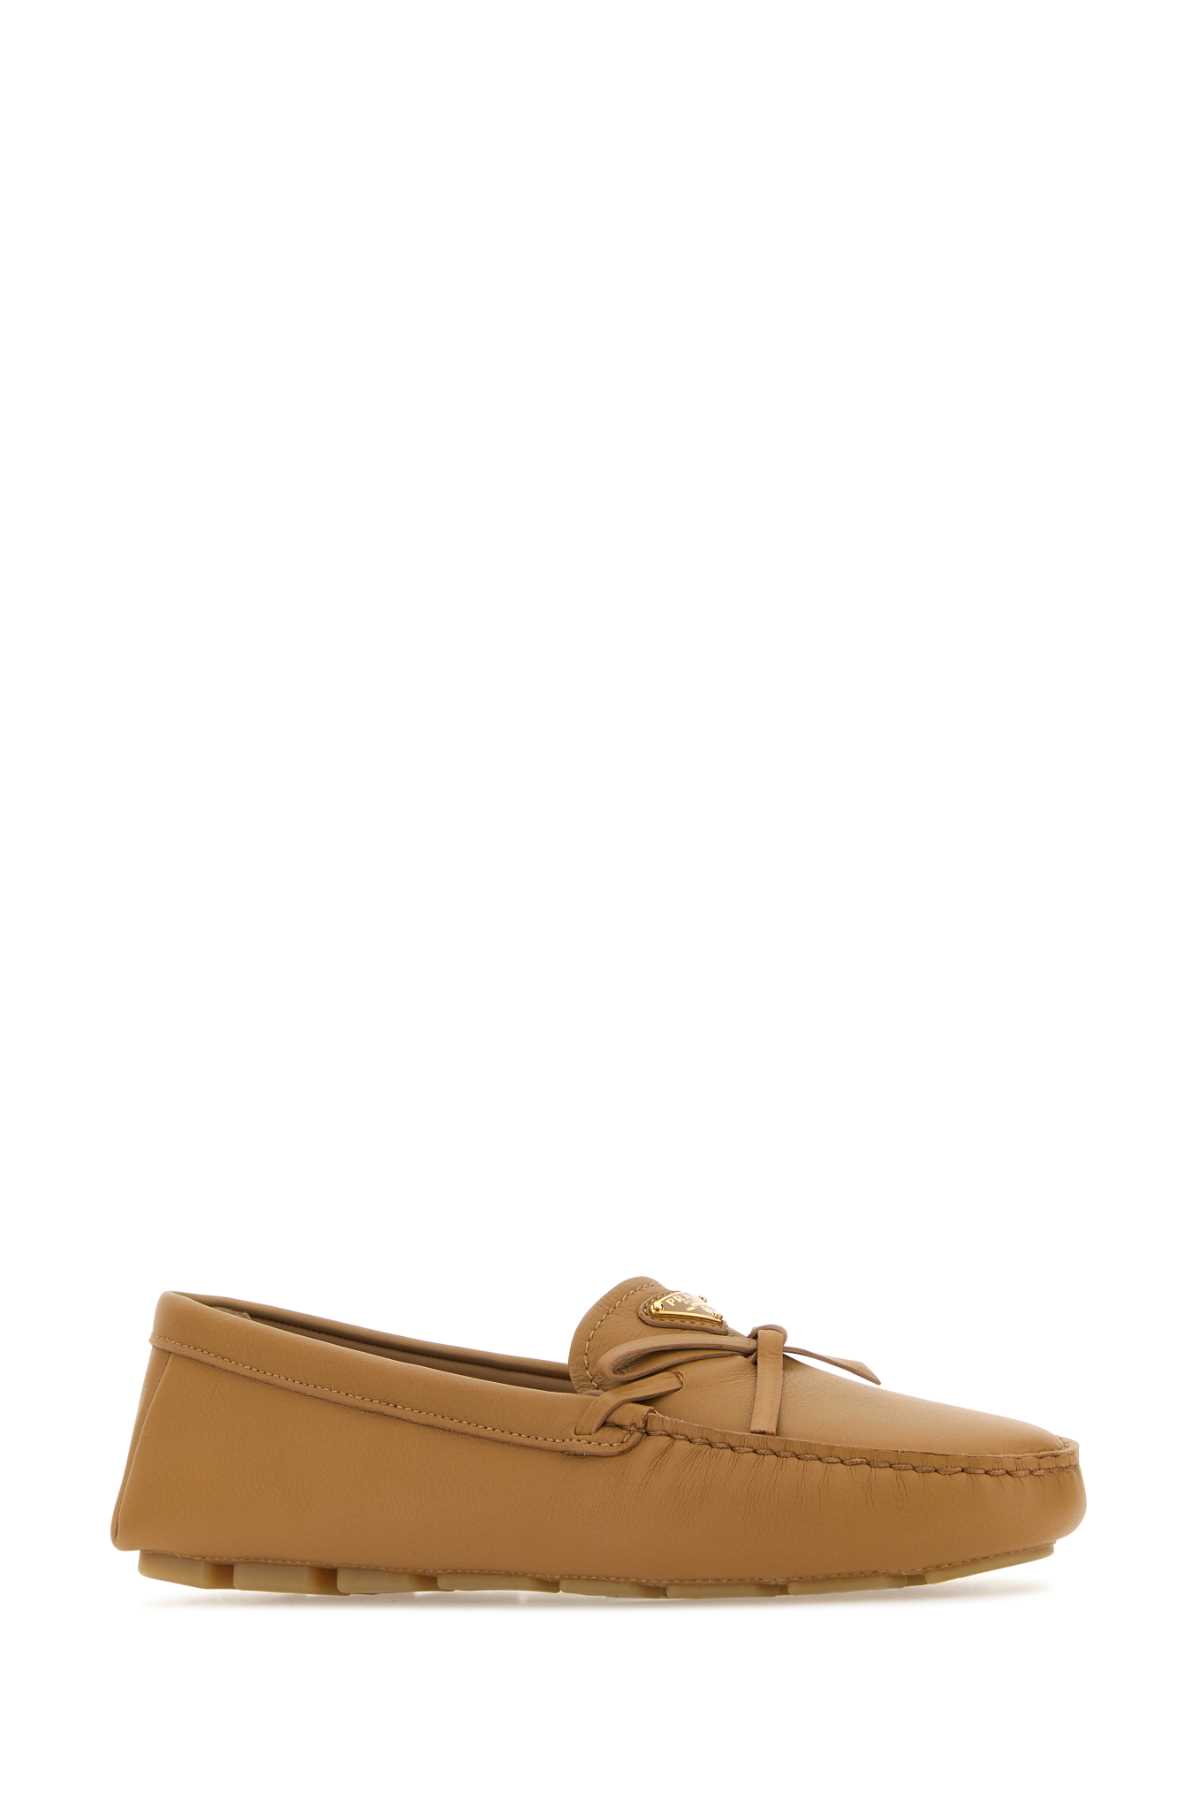 Prada Caramel Leather Loafers In Naturale